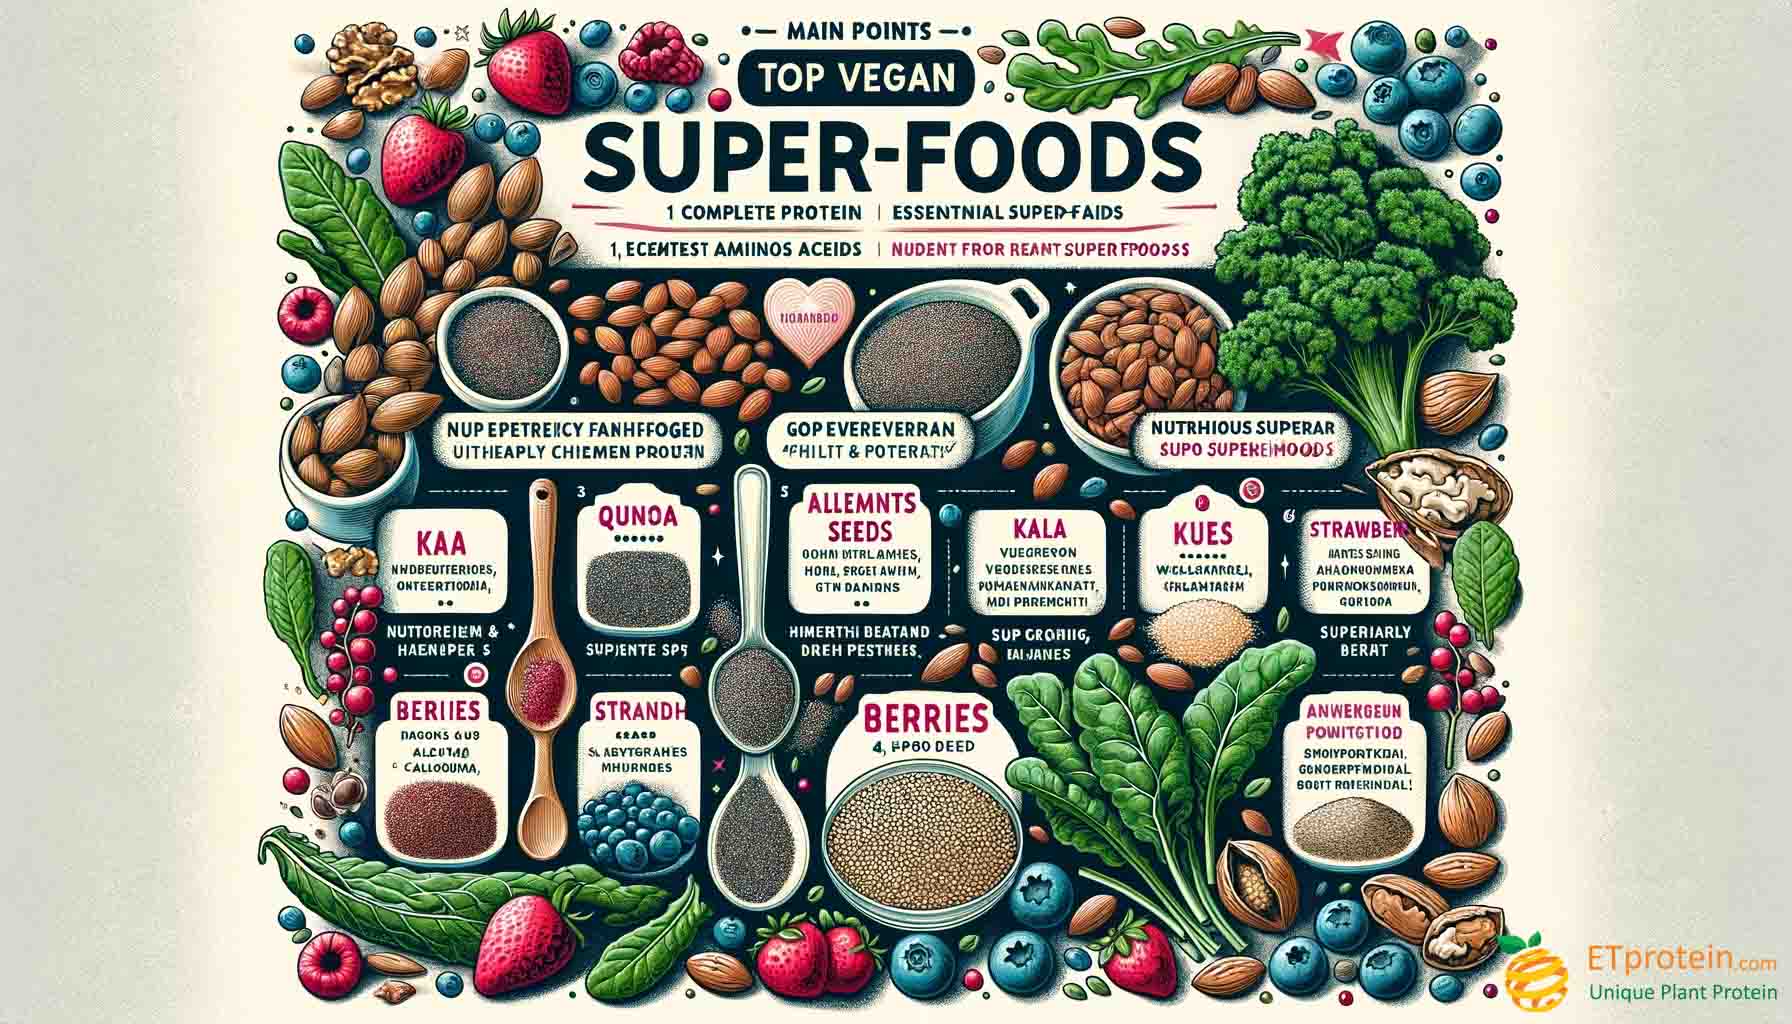 Vegan Superfoods: Nourishing Your Body Naturally. Explore the benefits of vegan superfoods for health and environment in our comprehensive guide, featuring nutrition tips and product insights.